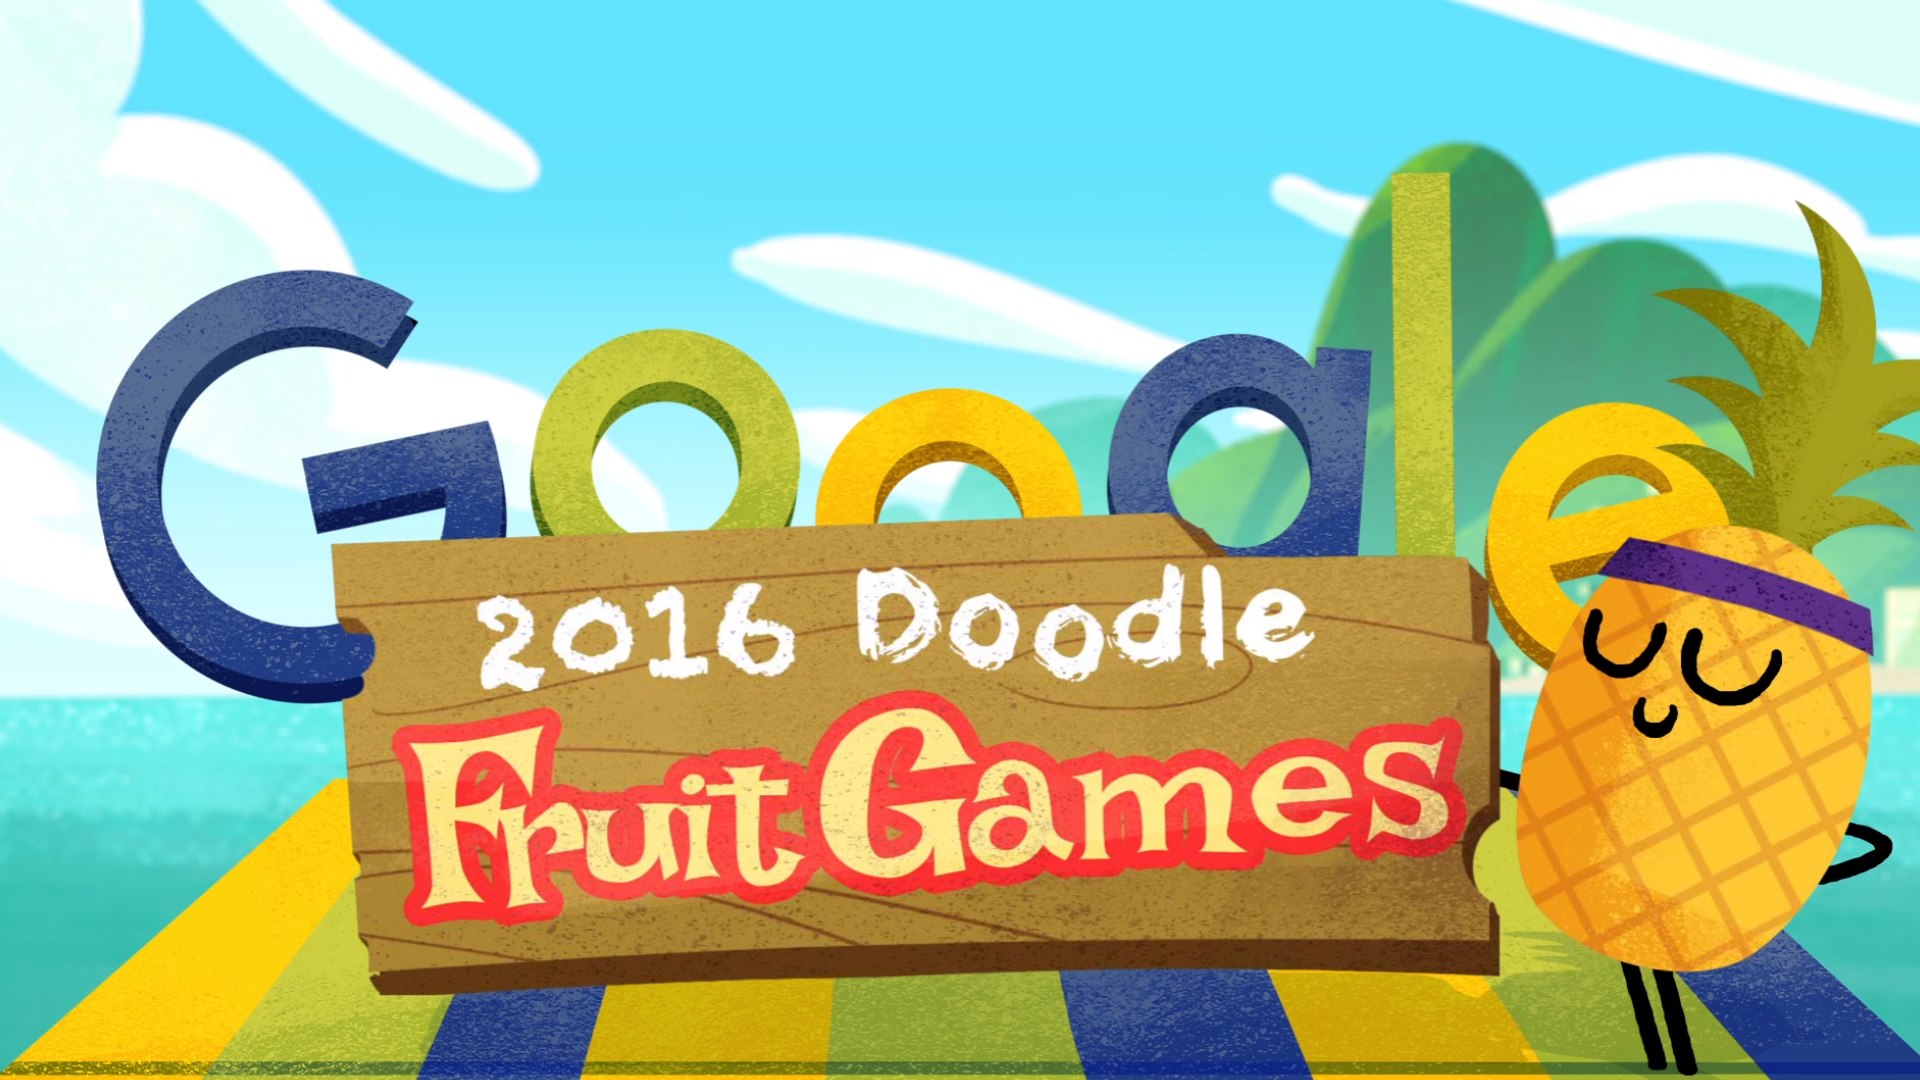 Today's Google Doodle is an Olympic-inspired video game and it's